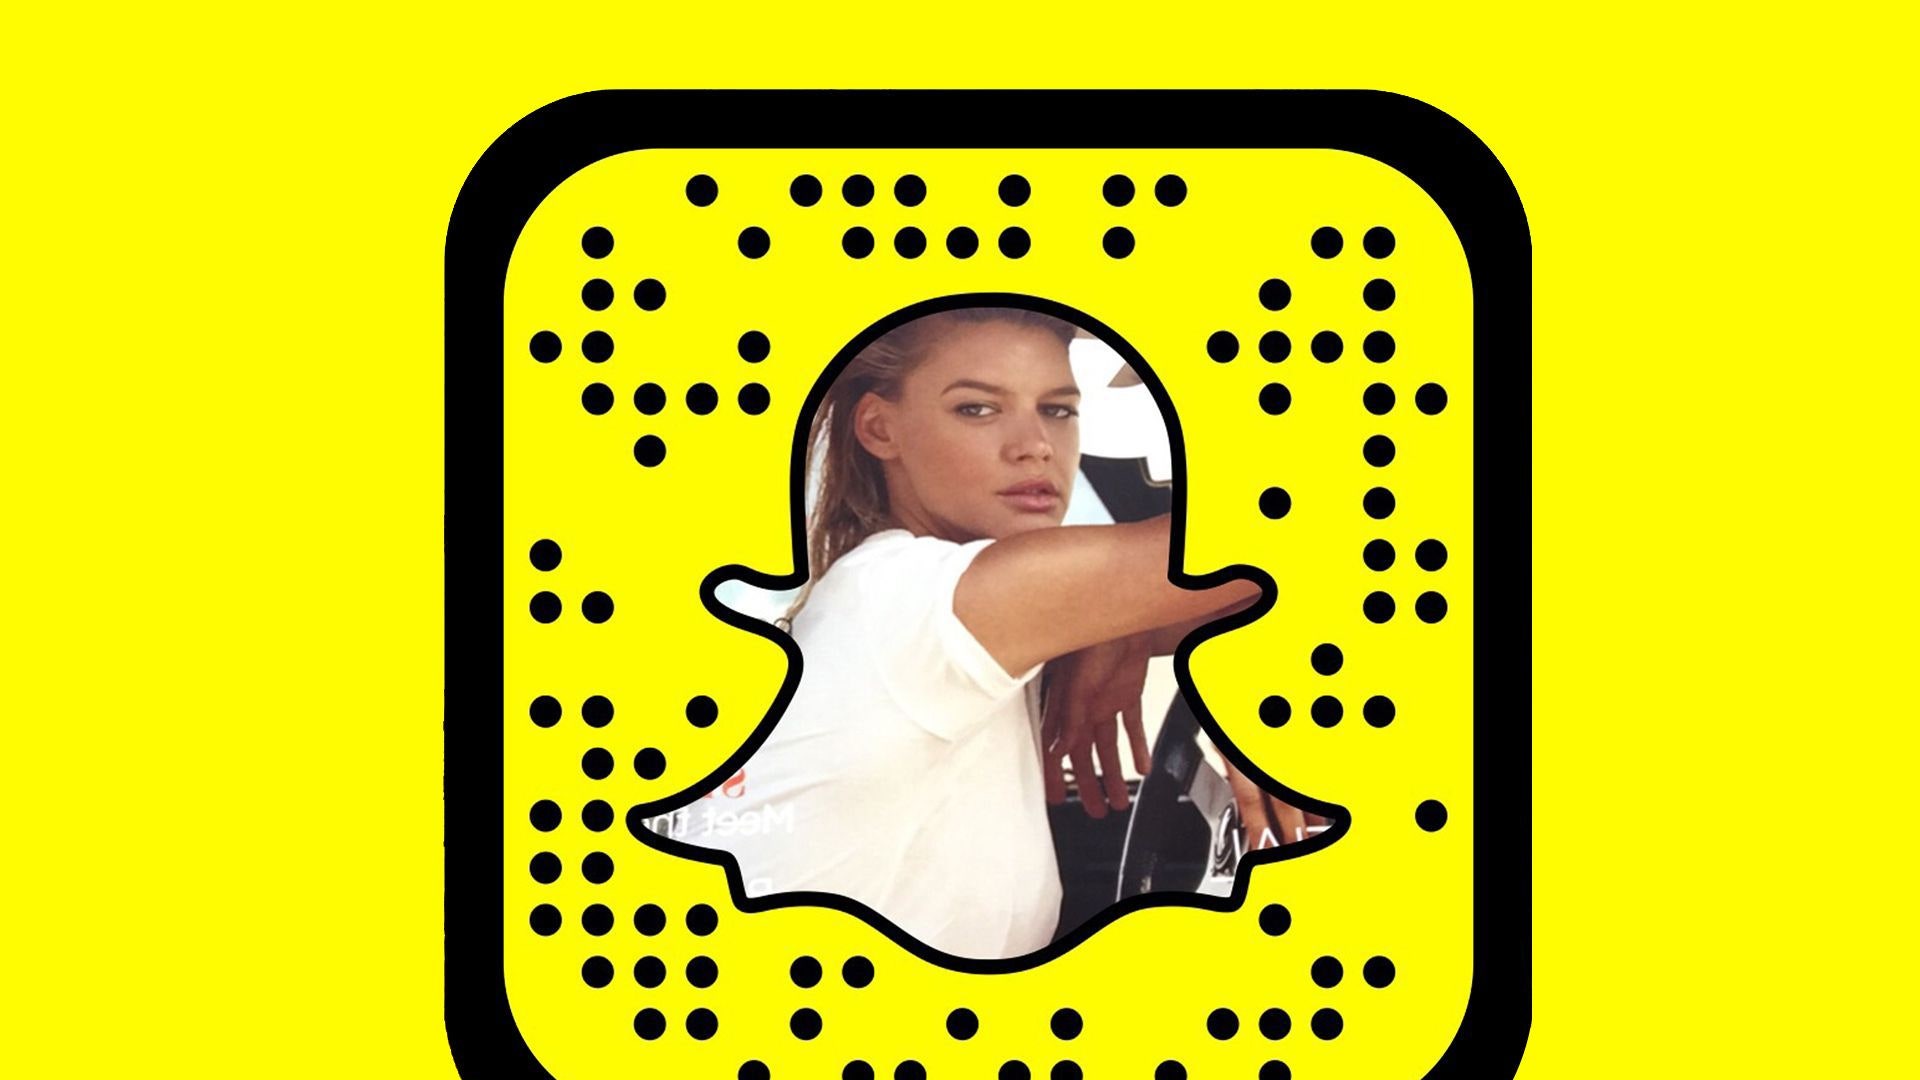 alexis pate share how to get dick pics on snapchat photos